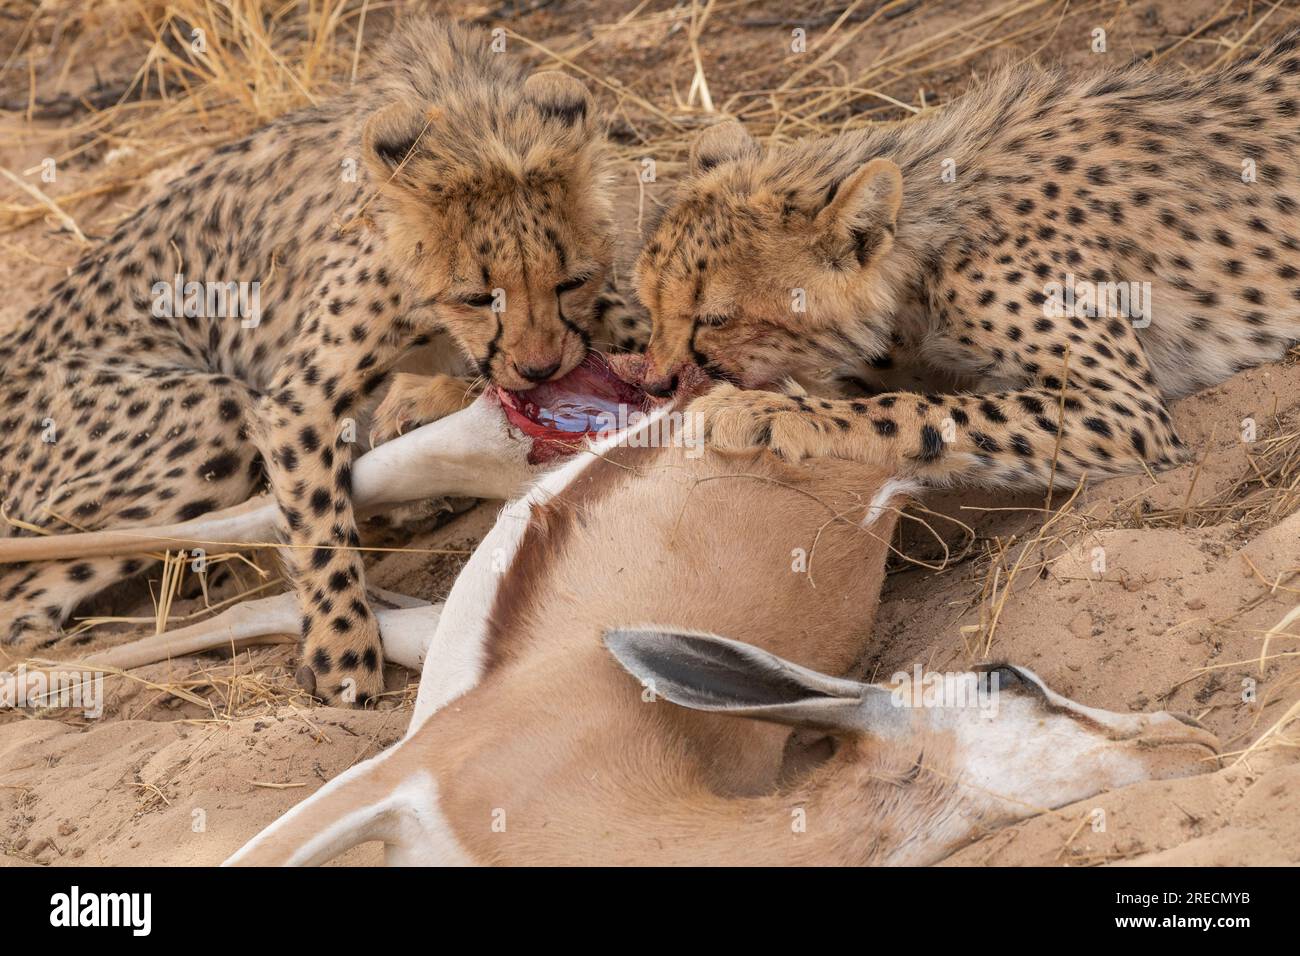 Two cheetah cubs feeding on a springbok kill in the Kgalagadi Transfrontier National Park, South Africa Stock Photo